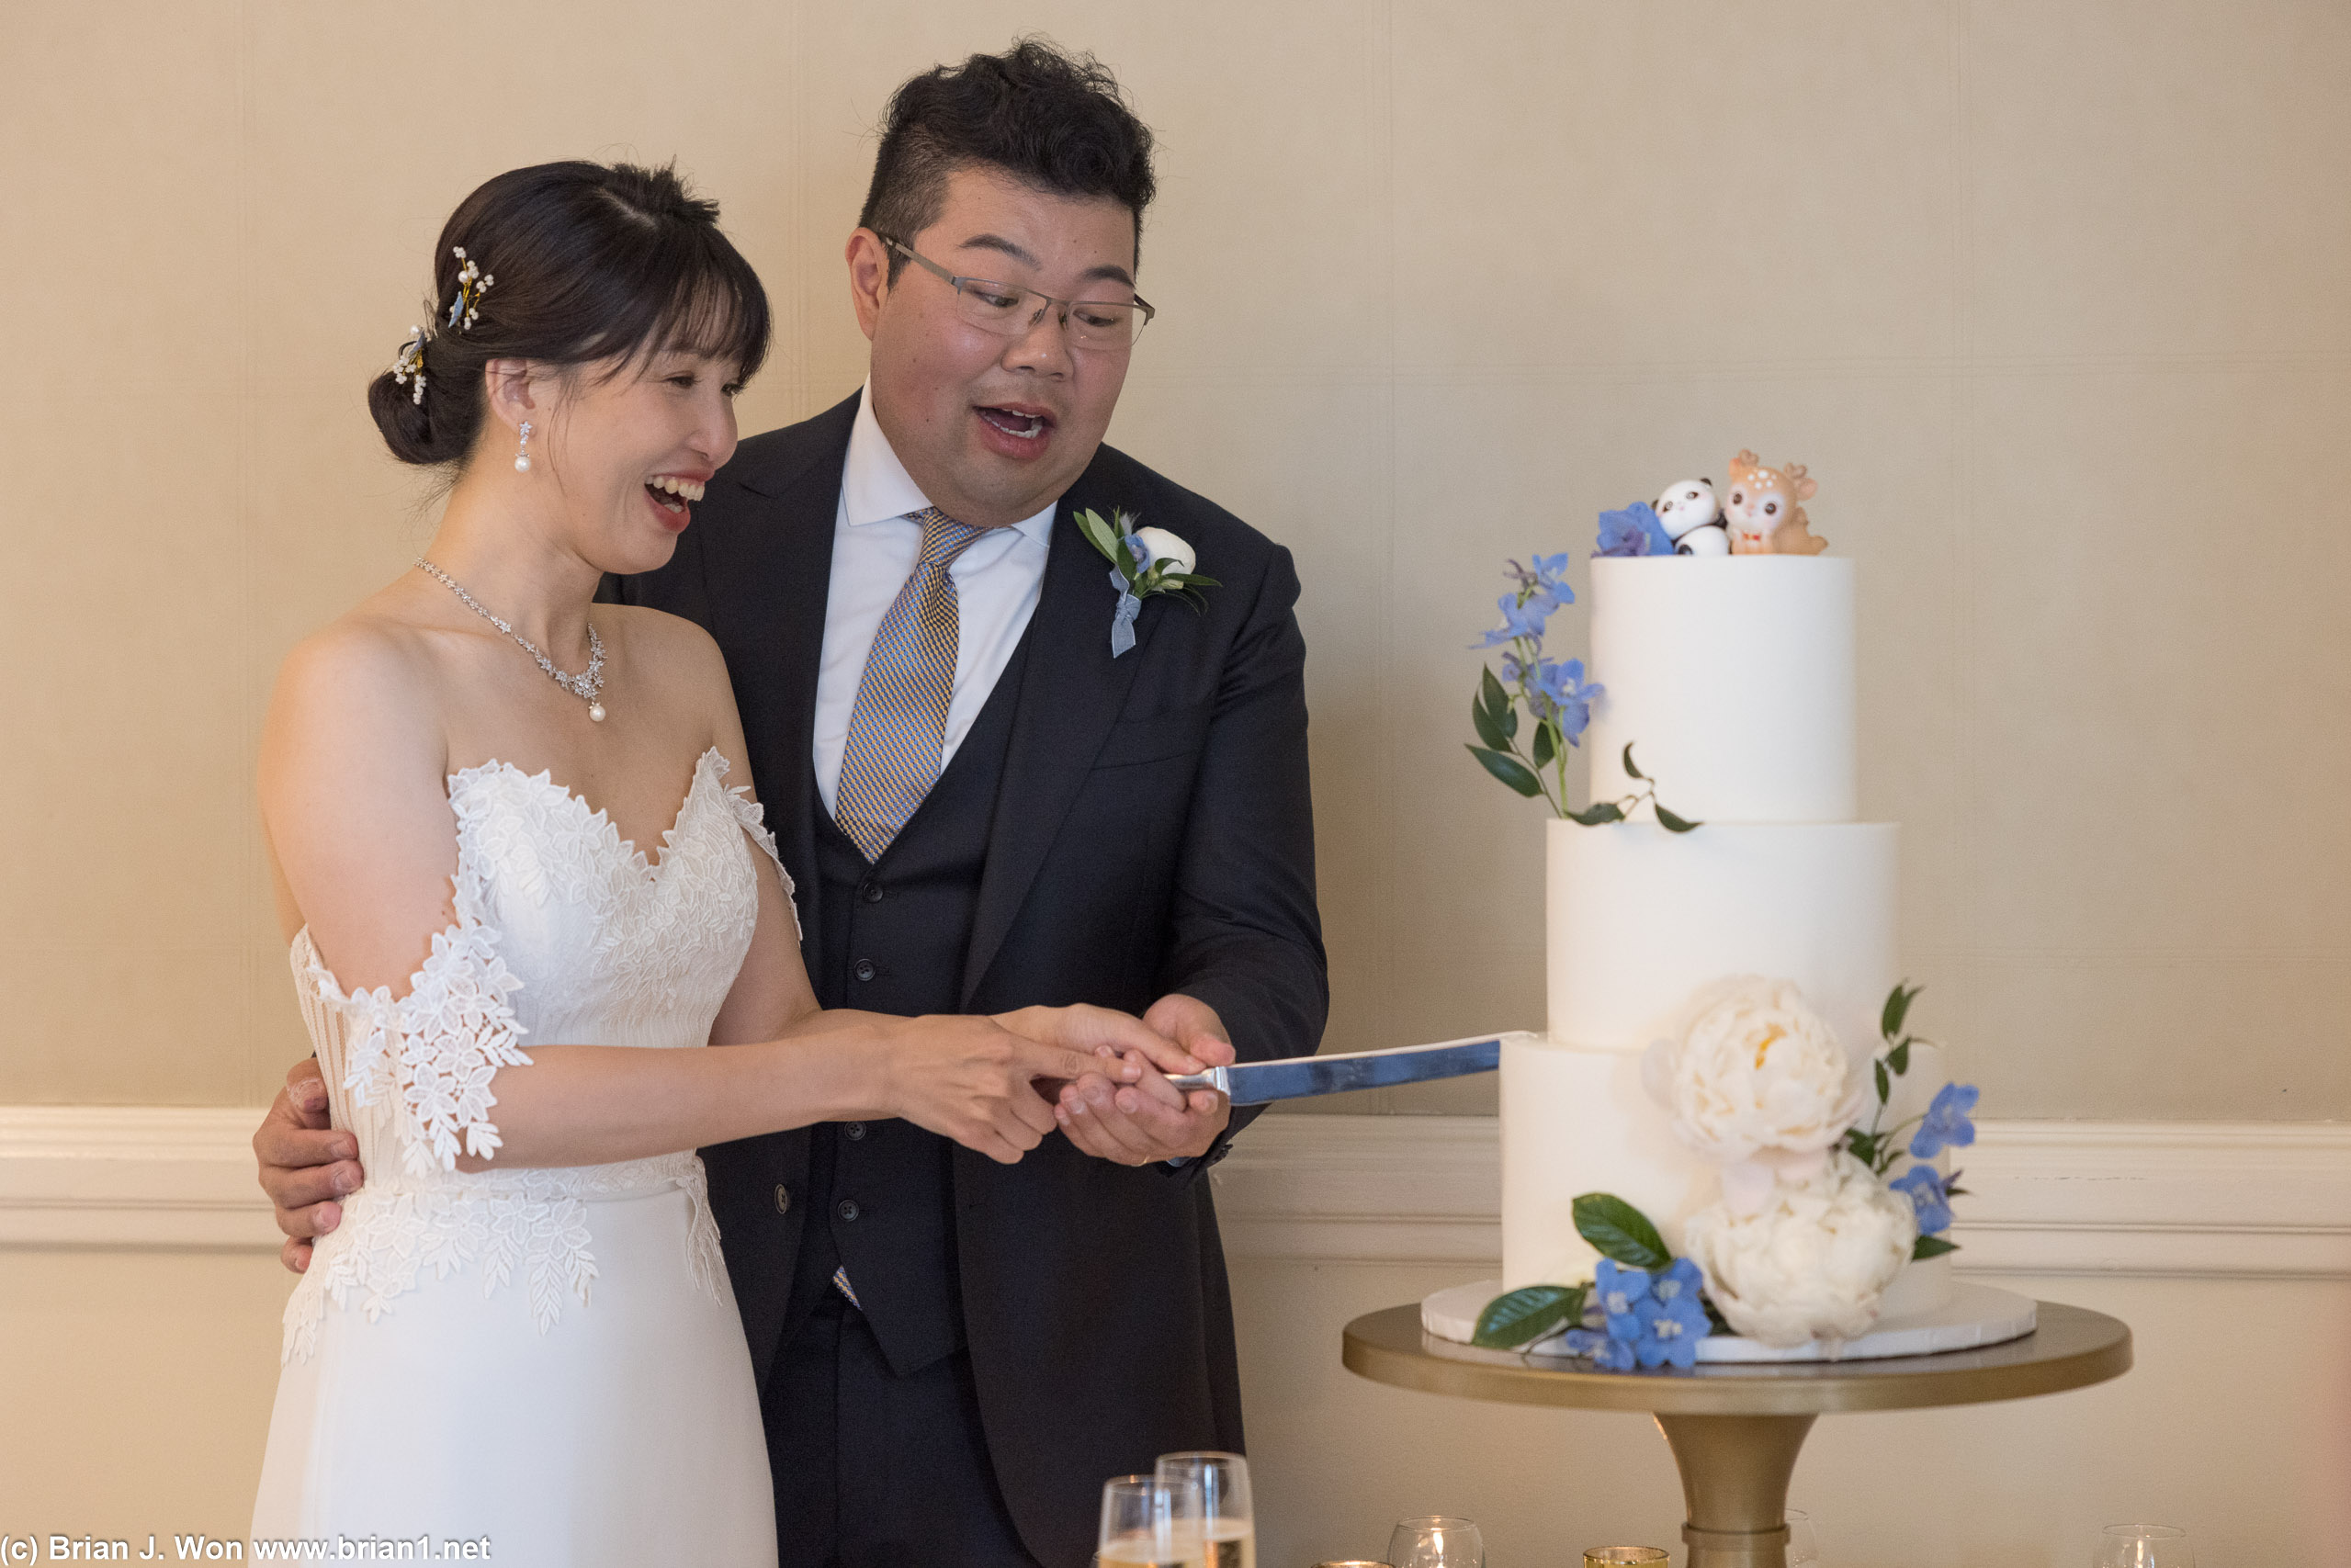 Time for both silly expressions and cake cutting.